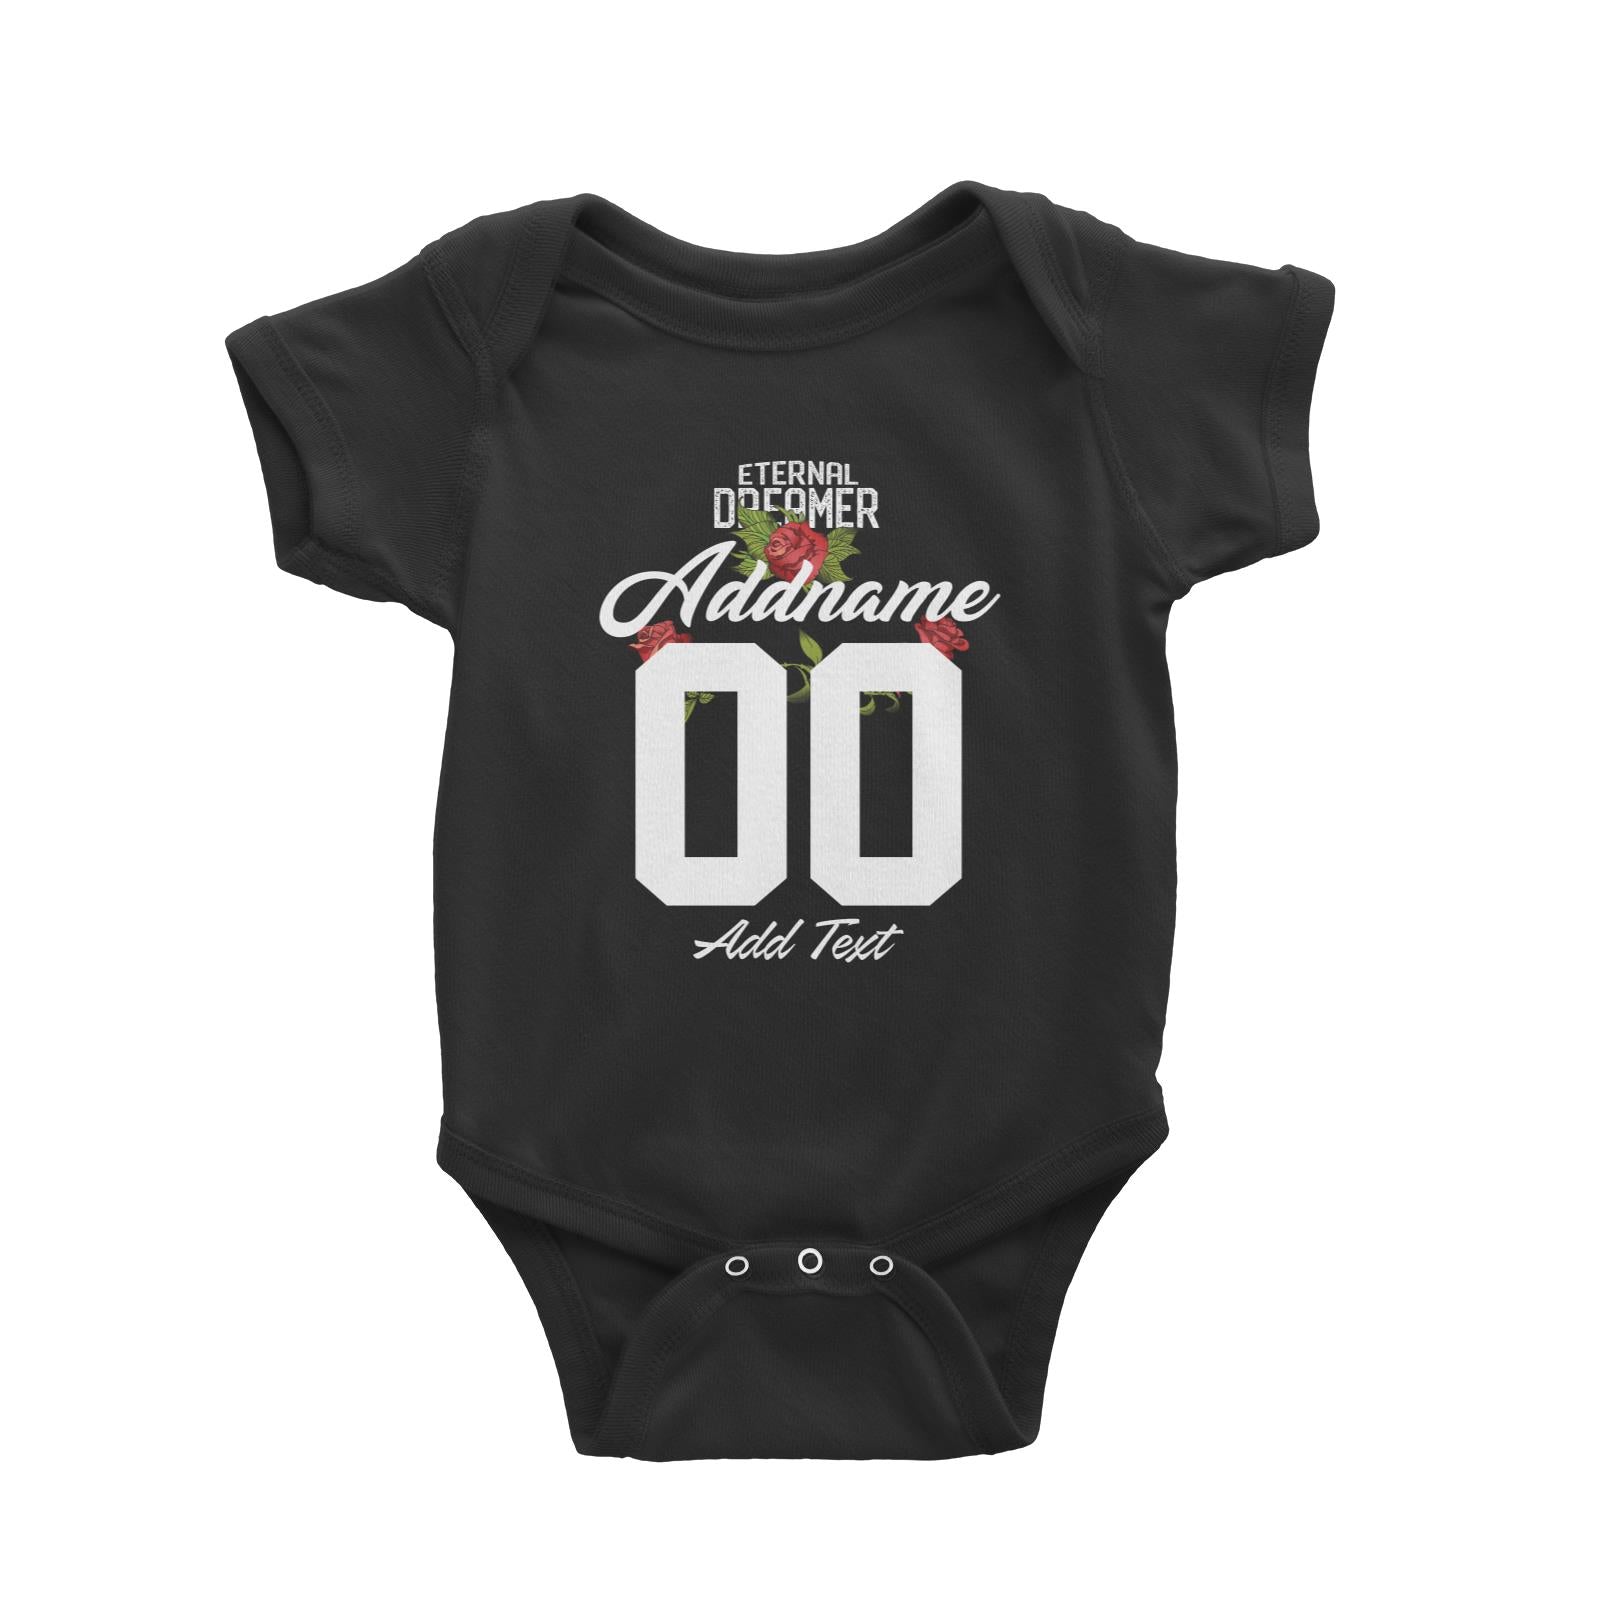 Eternal Dreamer with Roses Personalizable with Name Number and Text Baby Romper